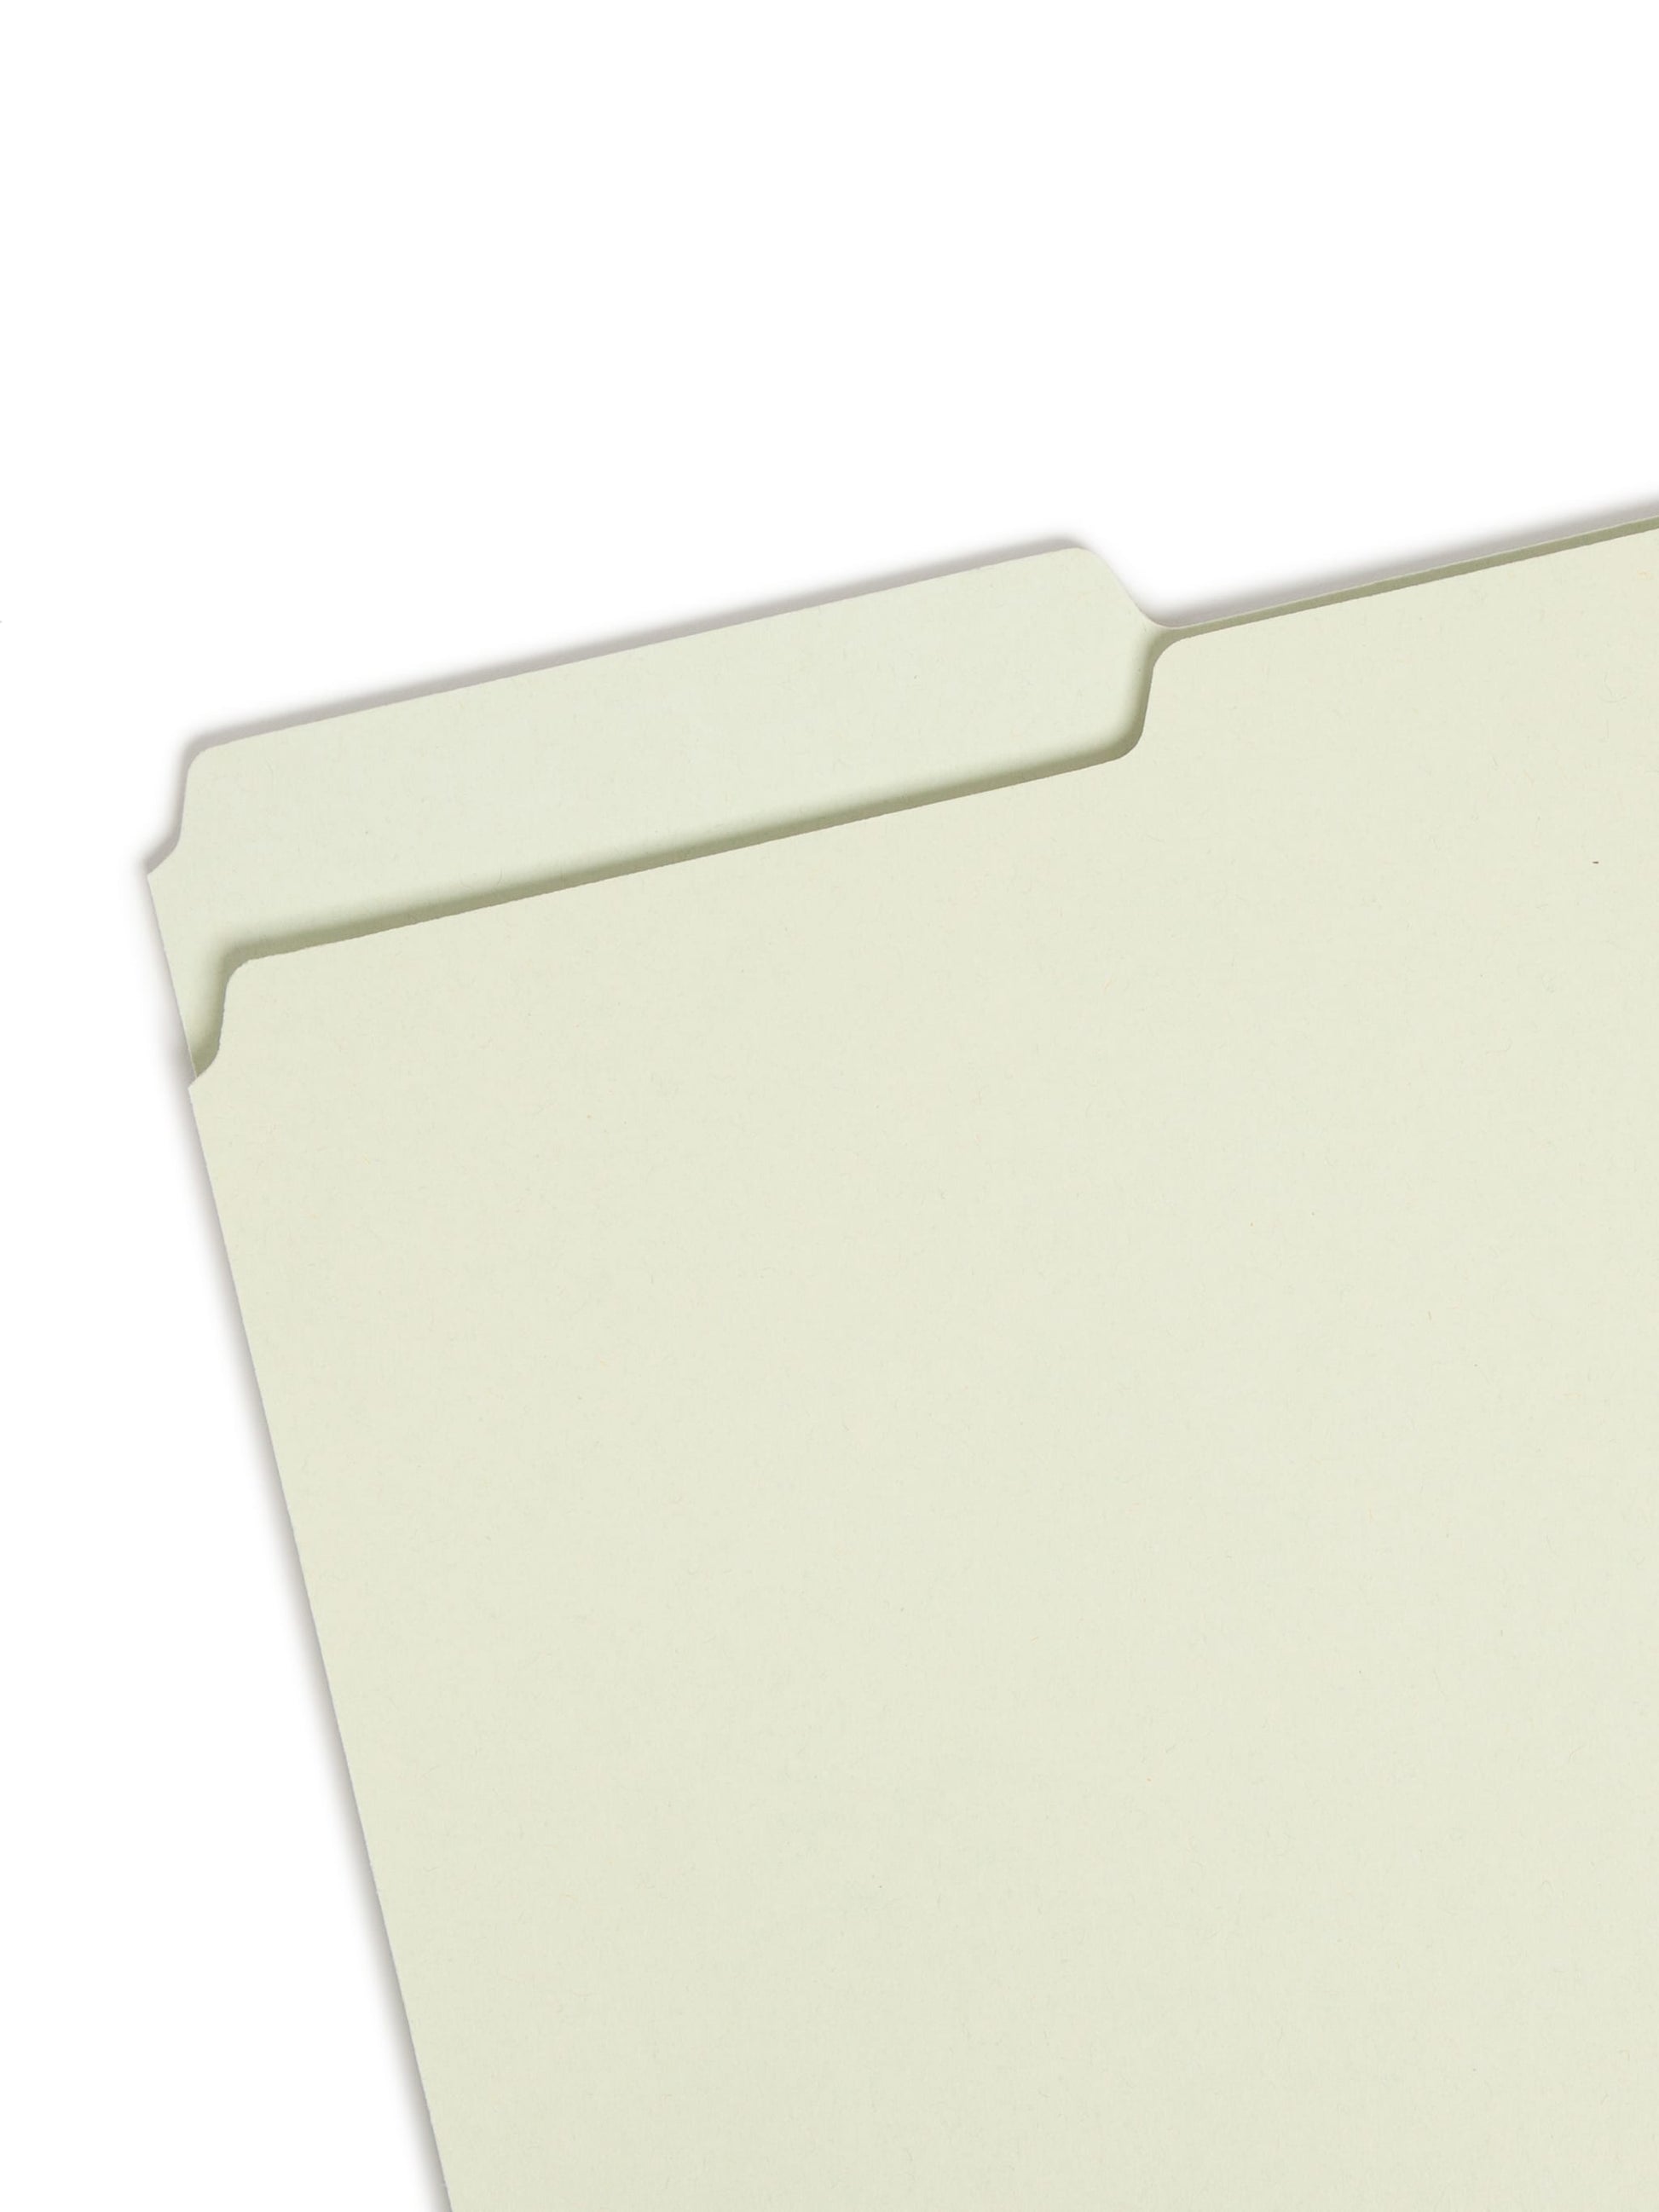 Pressboard File Folders, 2 inch Expansion, Gray/Green Color, Legal Size, 